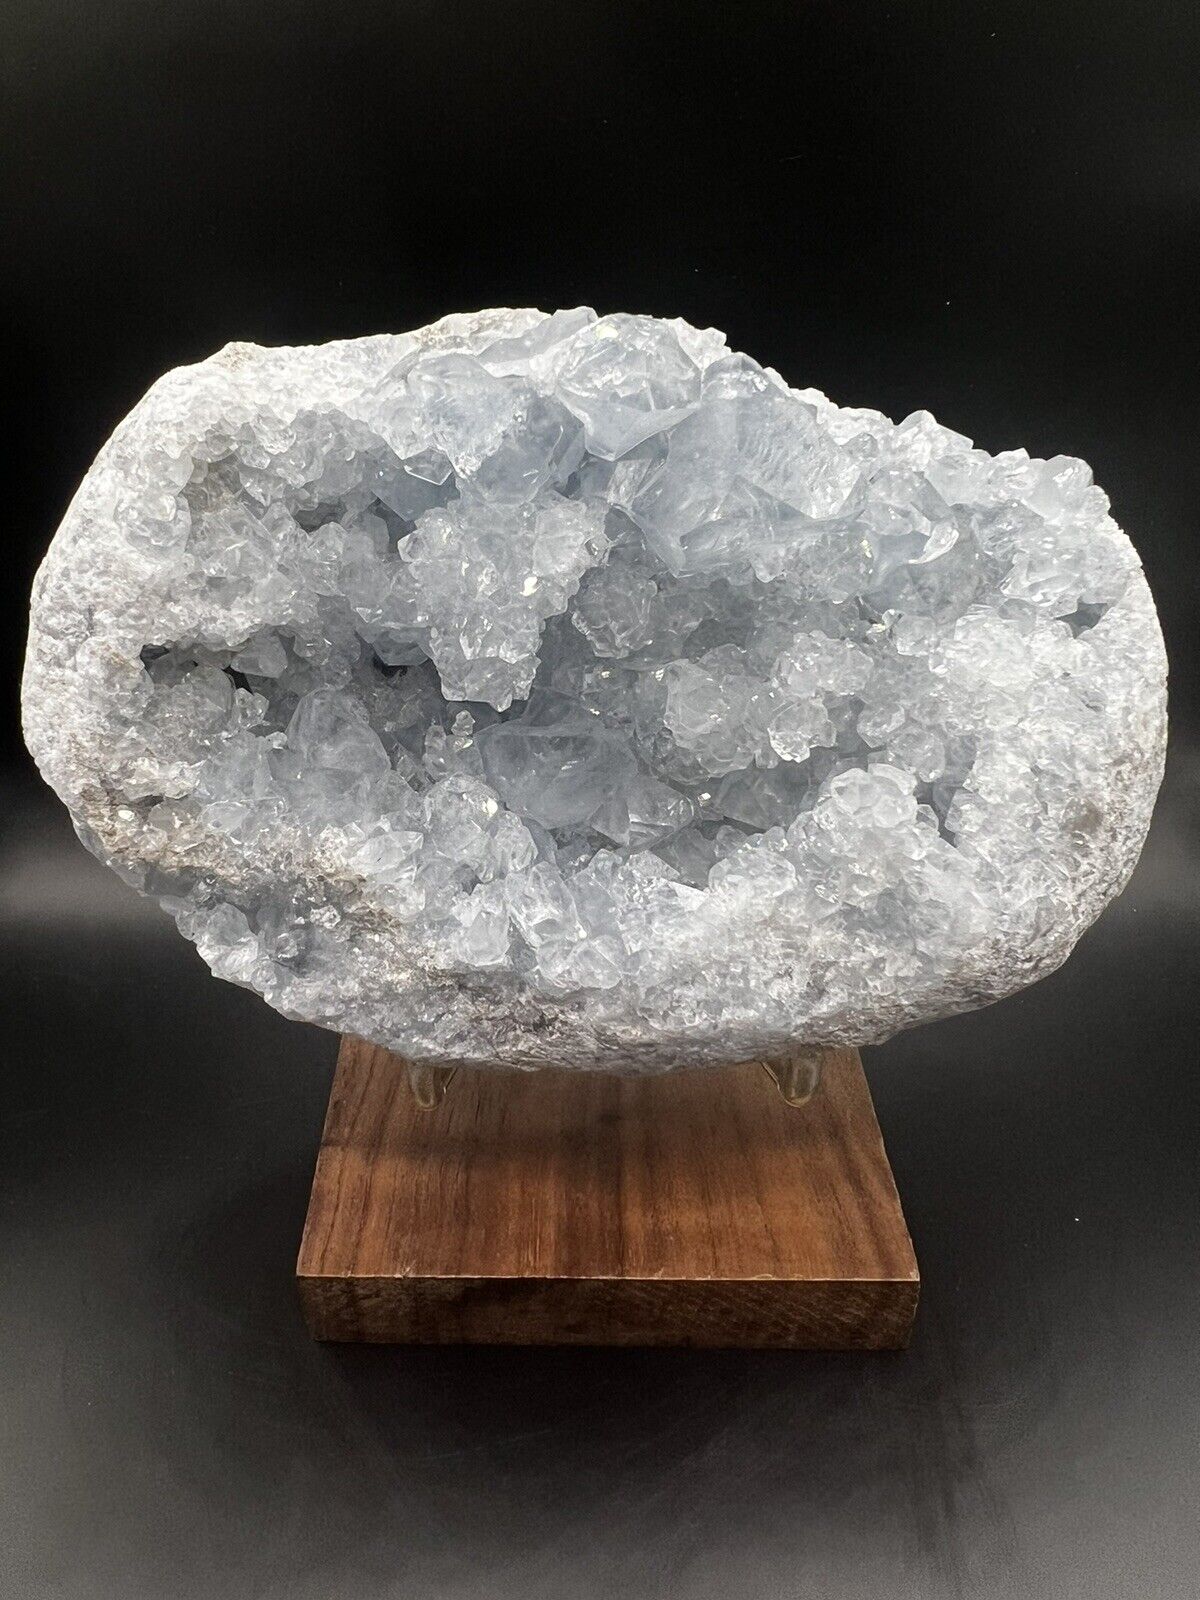 2.5 Lb. Natural Blue Celestite Crystal Geode With Stand